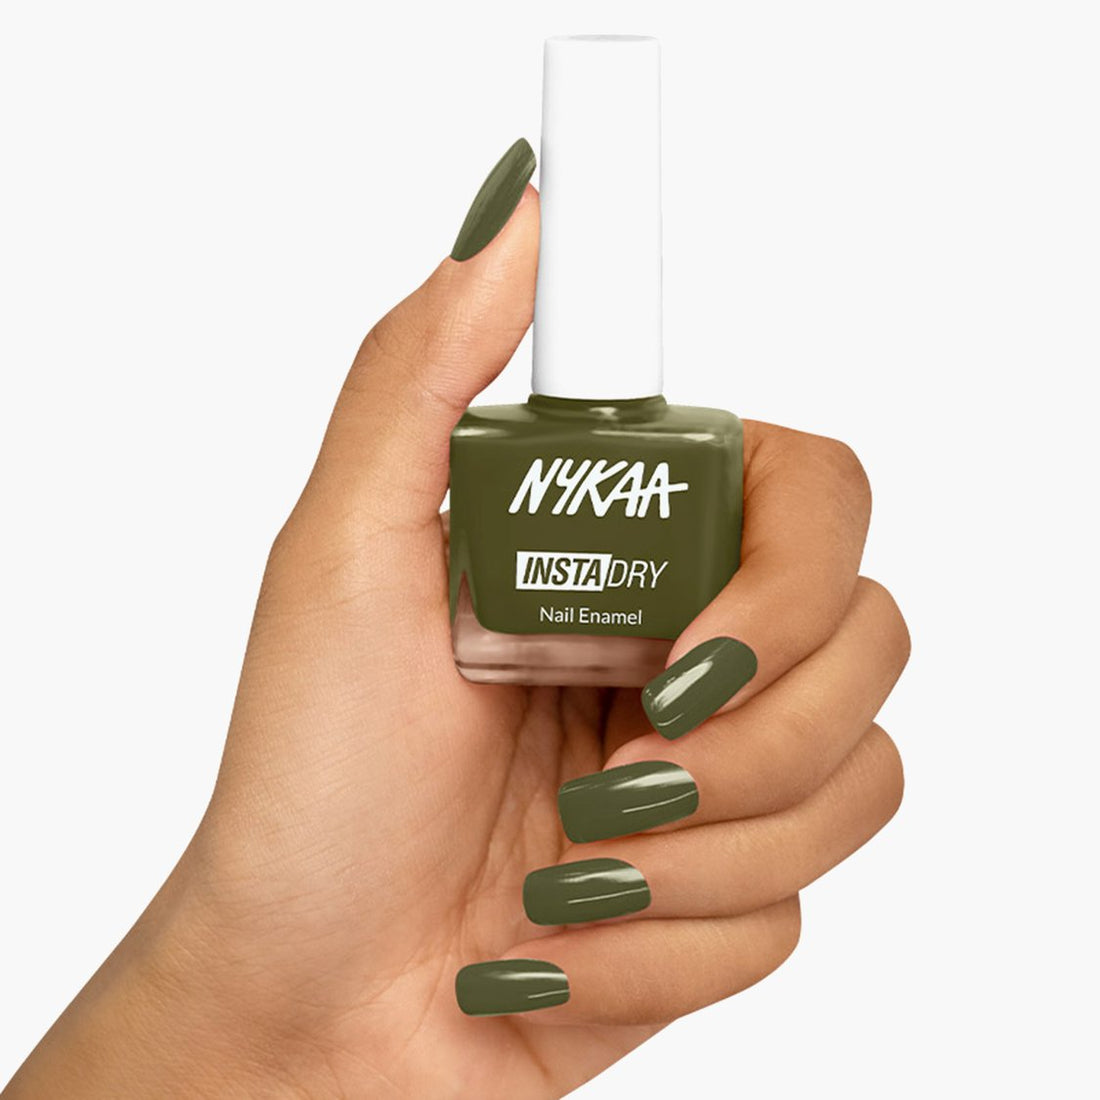 25 Stunning Olive Green Nail Designs You Must Copy Right Now - Women  Fashion Lifestyle Blog Shinecoco.com | Green nail designs, Green nails, Olive  nails